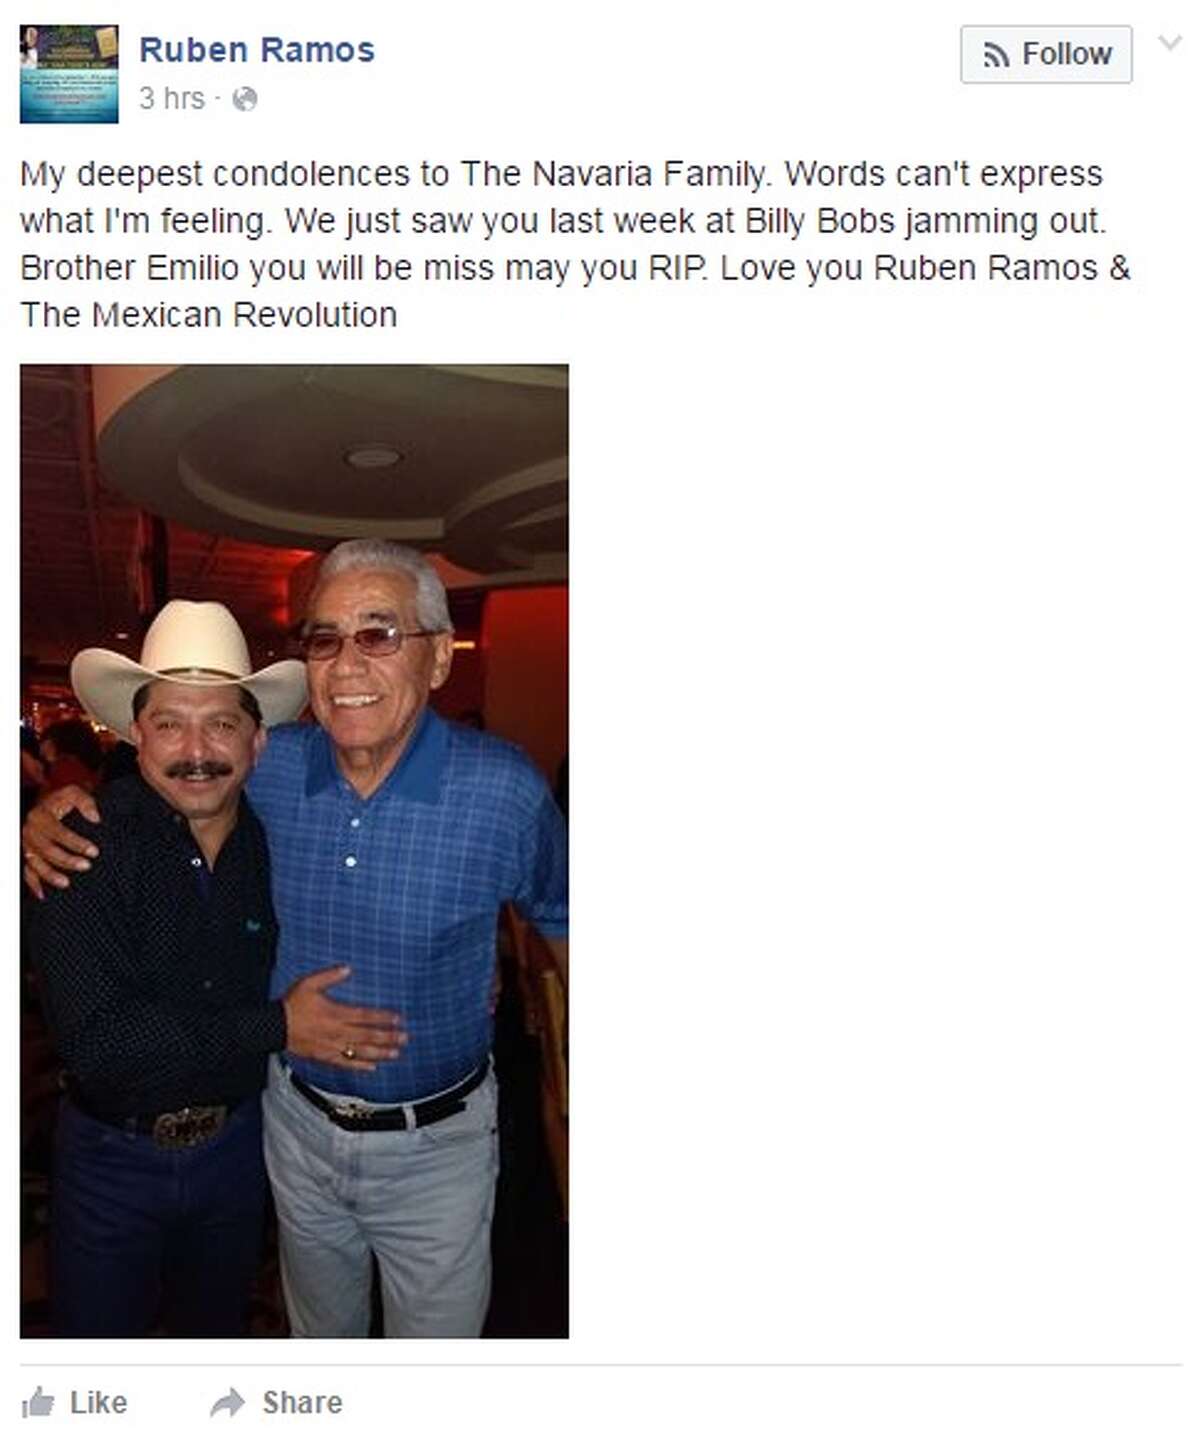 "My deepest condolences to The Navaria Family. Words can't express what I'm feeling. We just saw you last week at Billy Bobs jamming out. Brother Emilio you will be miss may you RIP. Love you Ruben Ramos & The Mexican Revolution," Ramos said in a Facebook post.